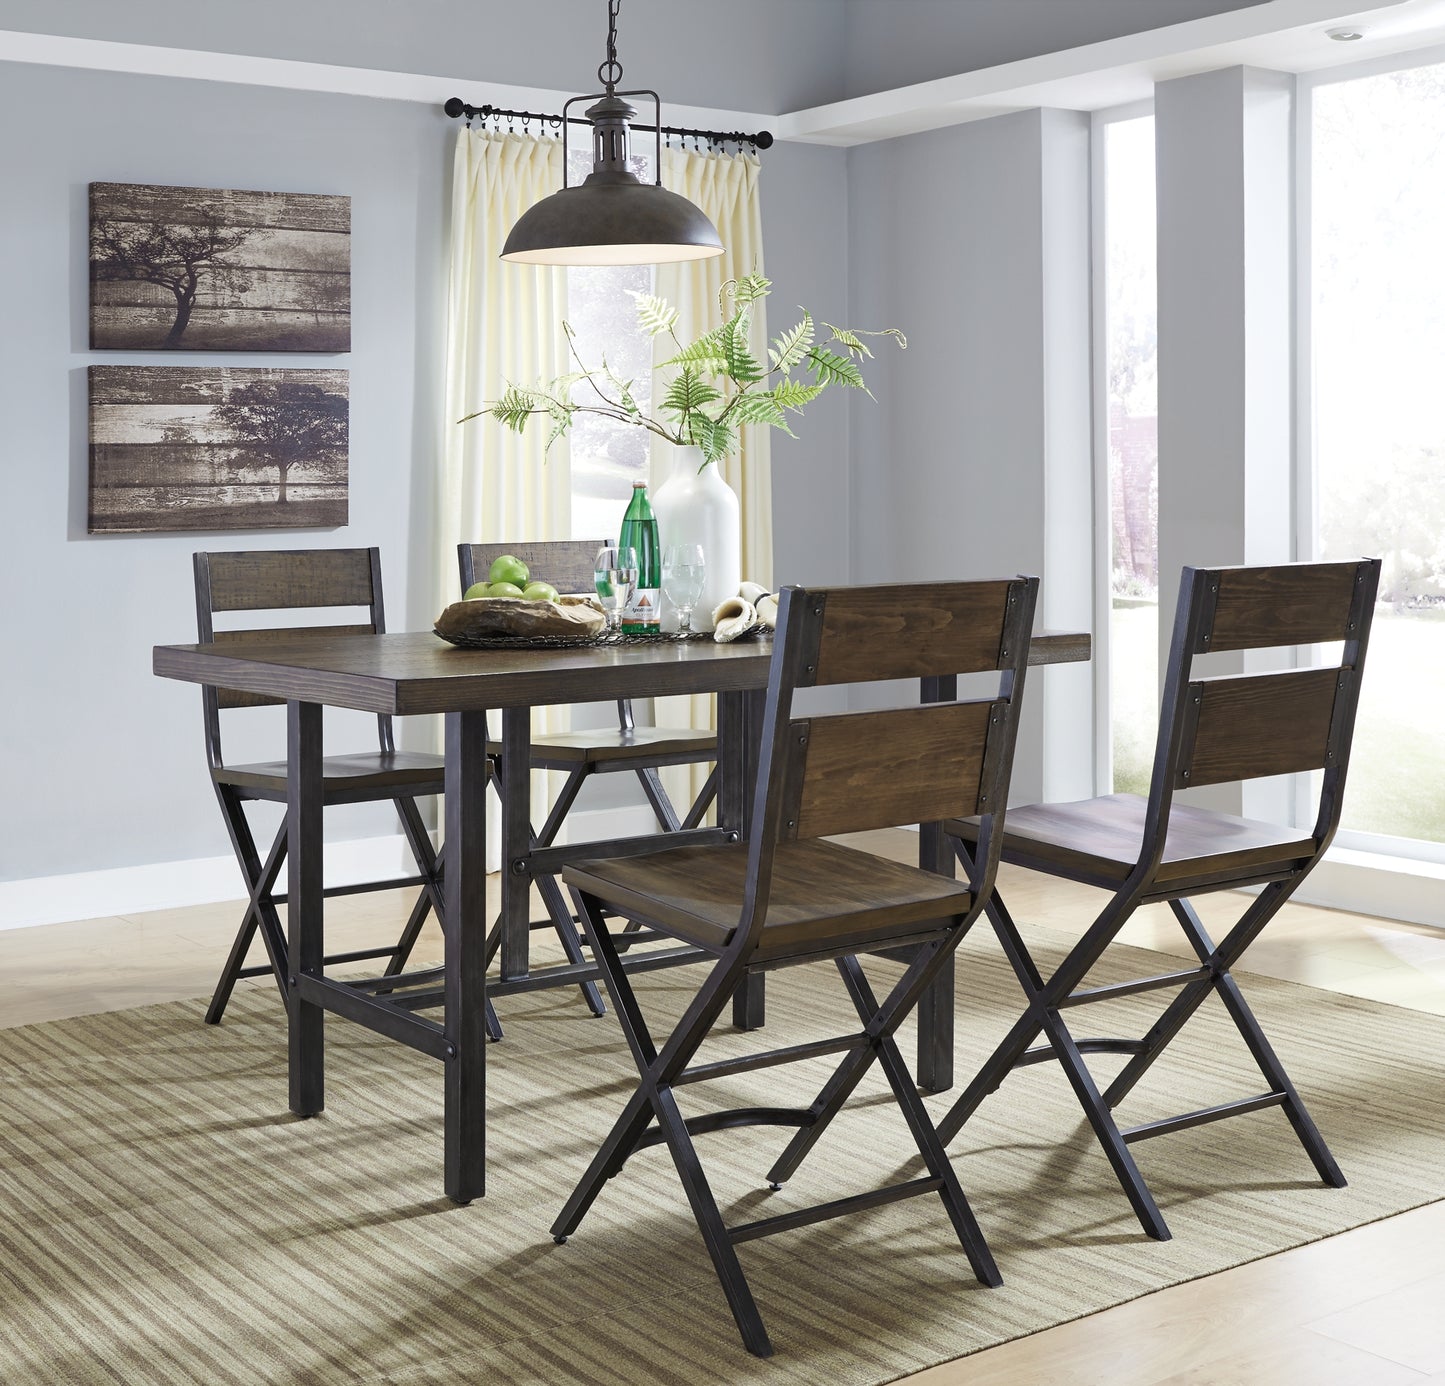 Kavara Counter Height Dining Table and 6 Barstools Wilson Furniture (OH)  in Bridgeport, Ohio. Serving Bridgeport, Yorkville, Bellaire, & Avondale